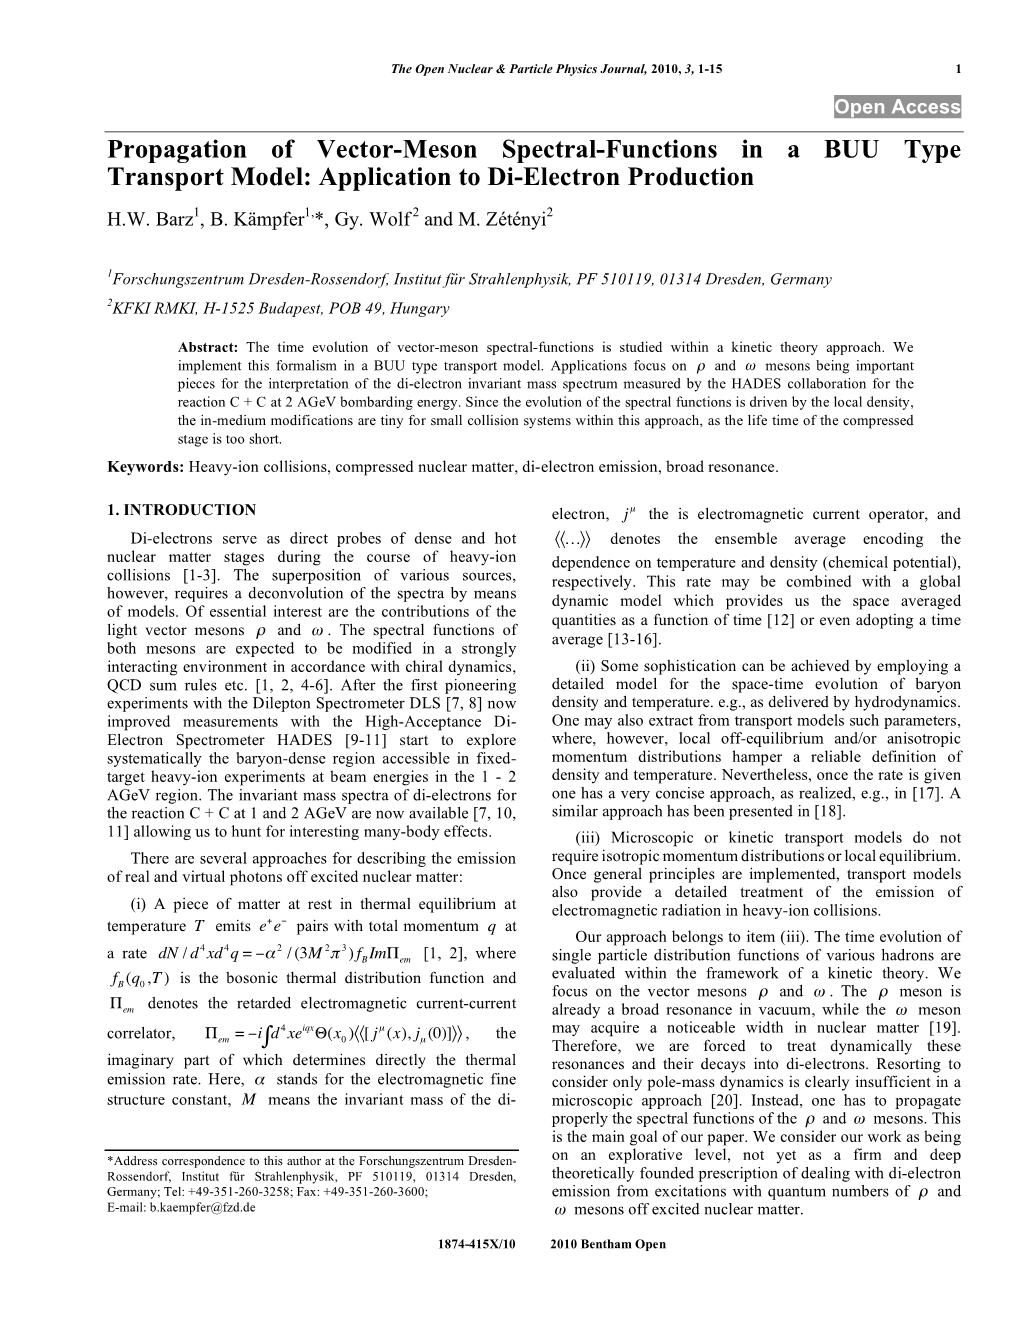 Propagation of Vector-Meson Spectral-Functions in a BUU Type Transport Model: Application to Di-Electron Production